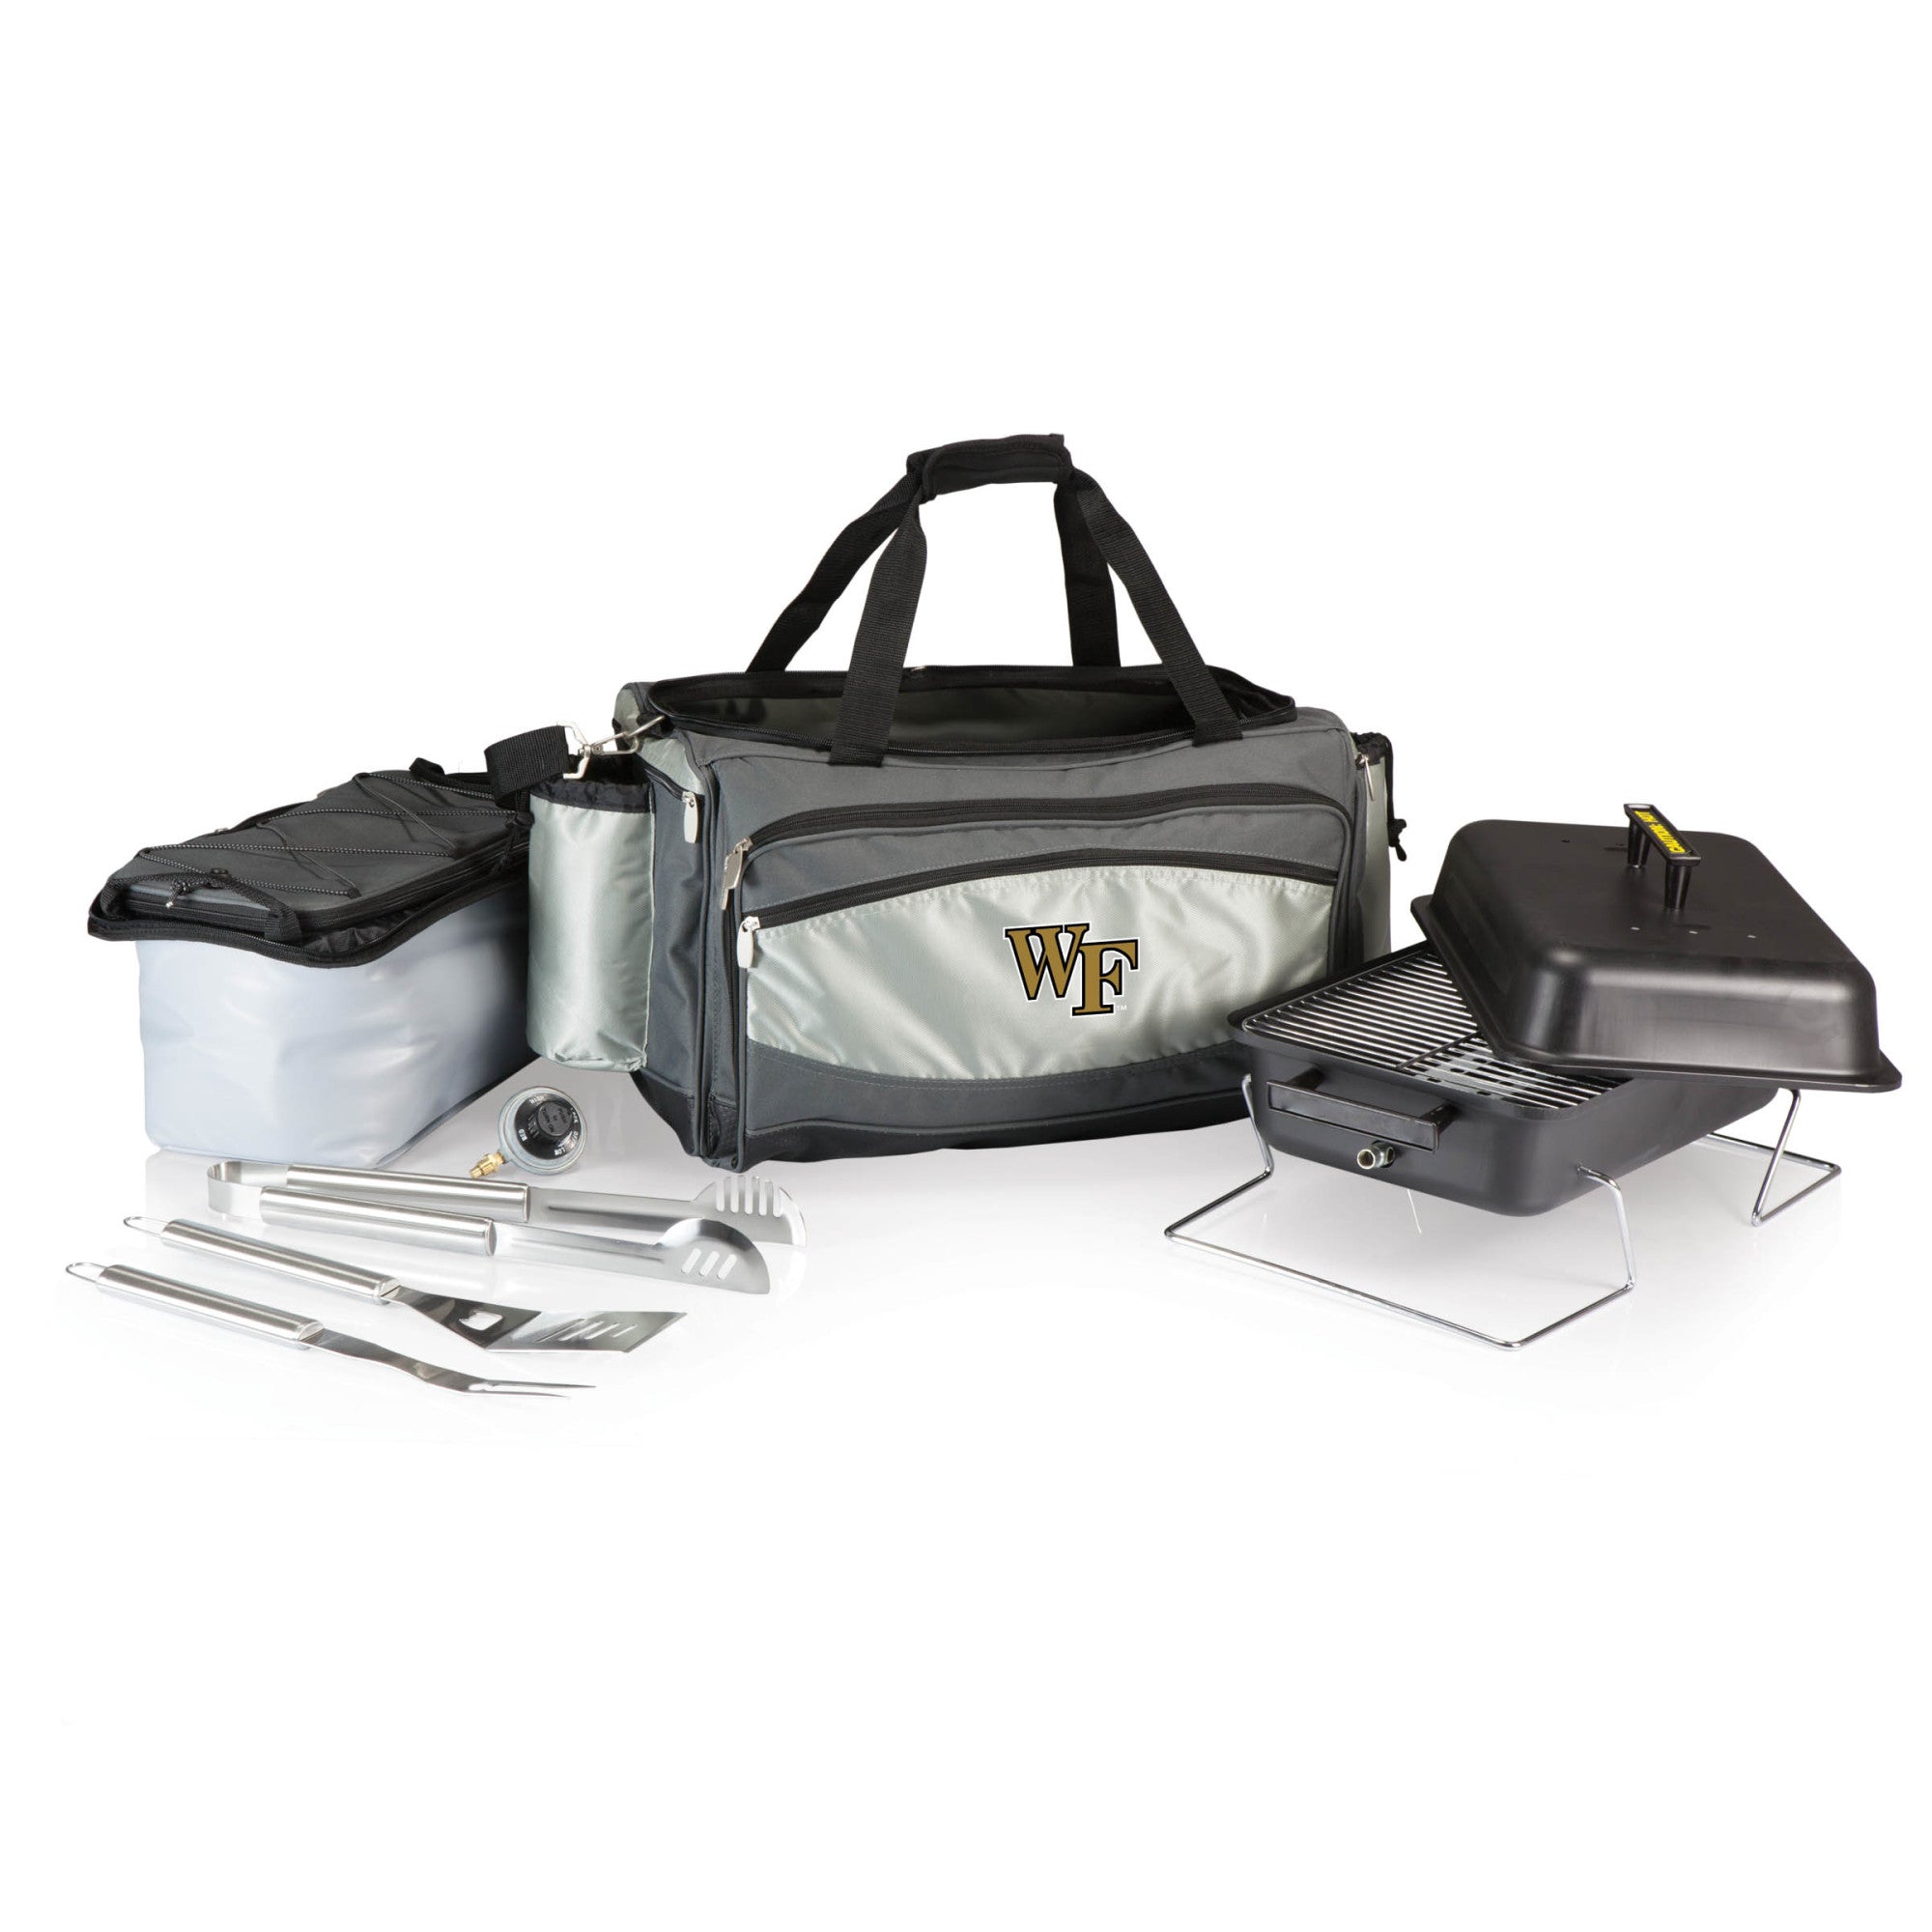 Wake Forest Demon Deacons - Vulcan Portable Propane Grill & Cooler Tote